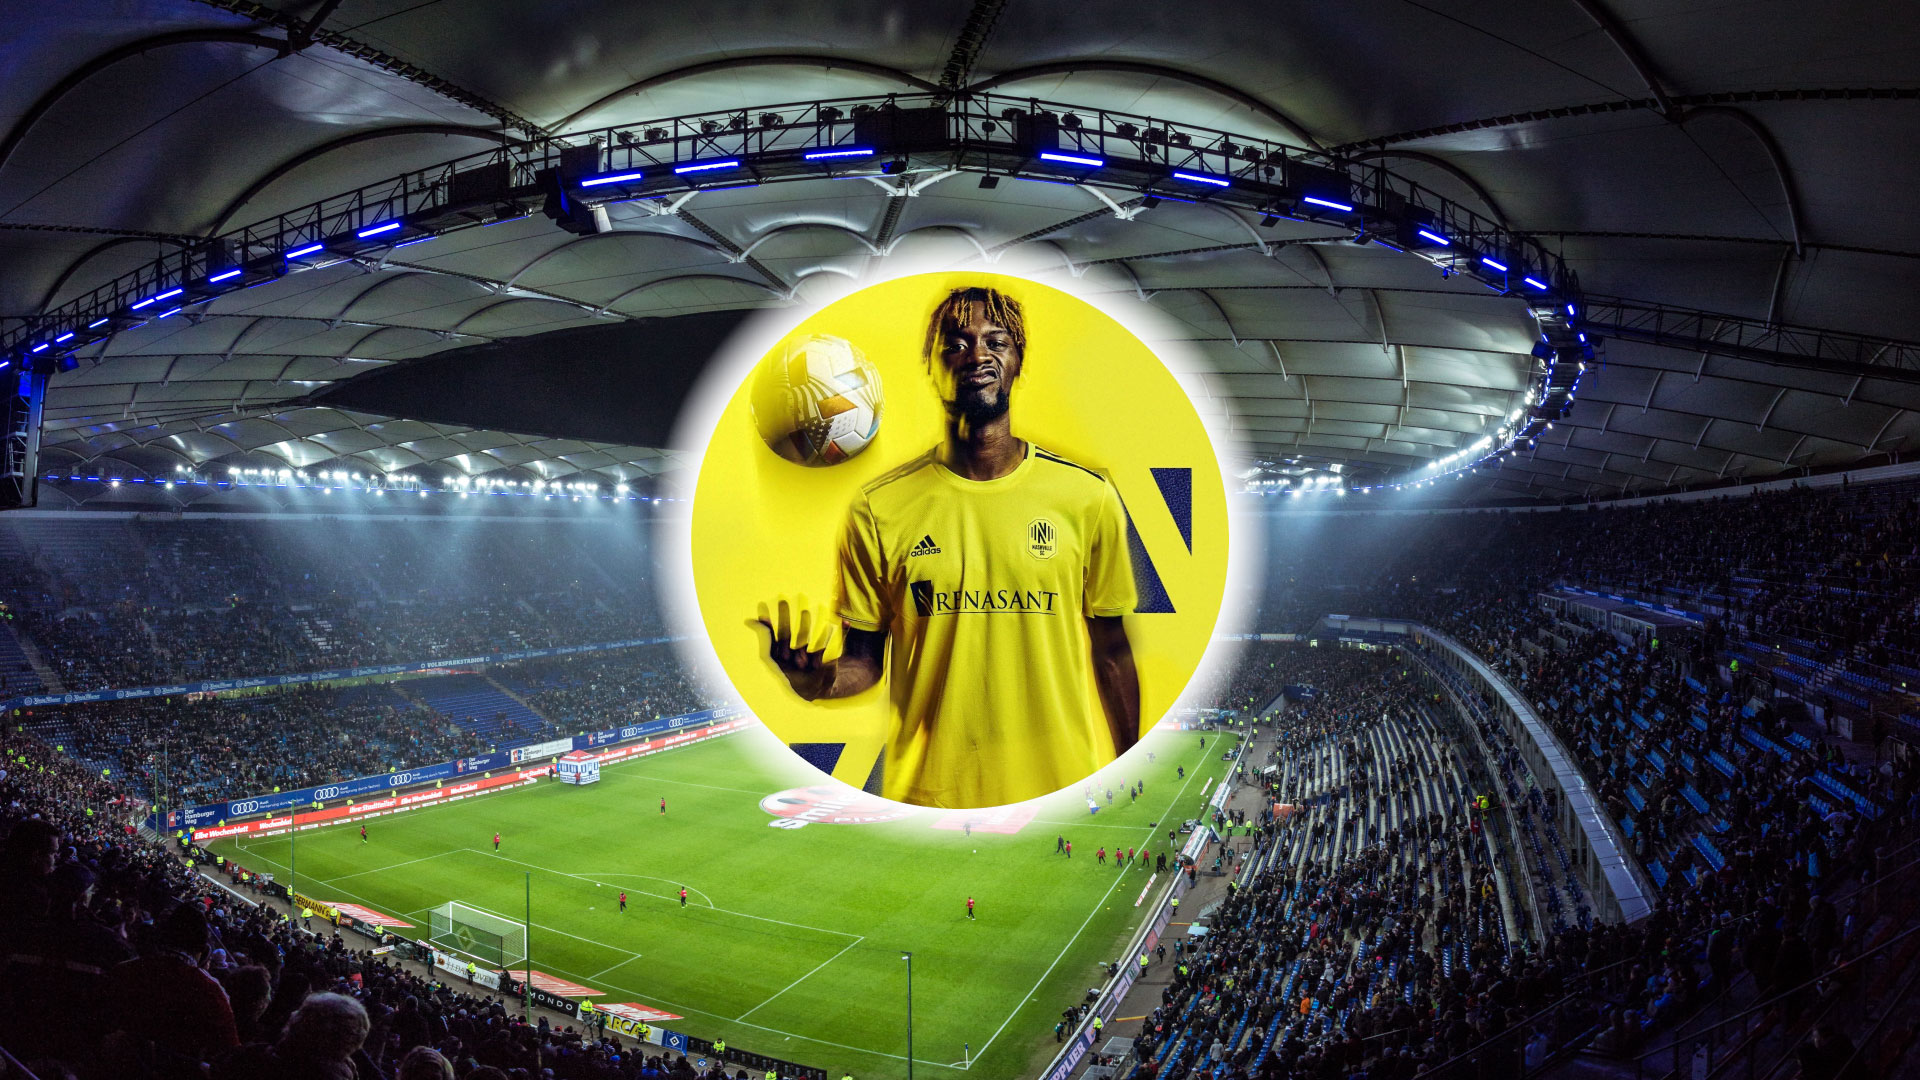 MLS Promotional image with player CJ Sapong